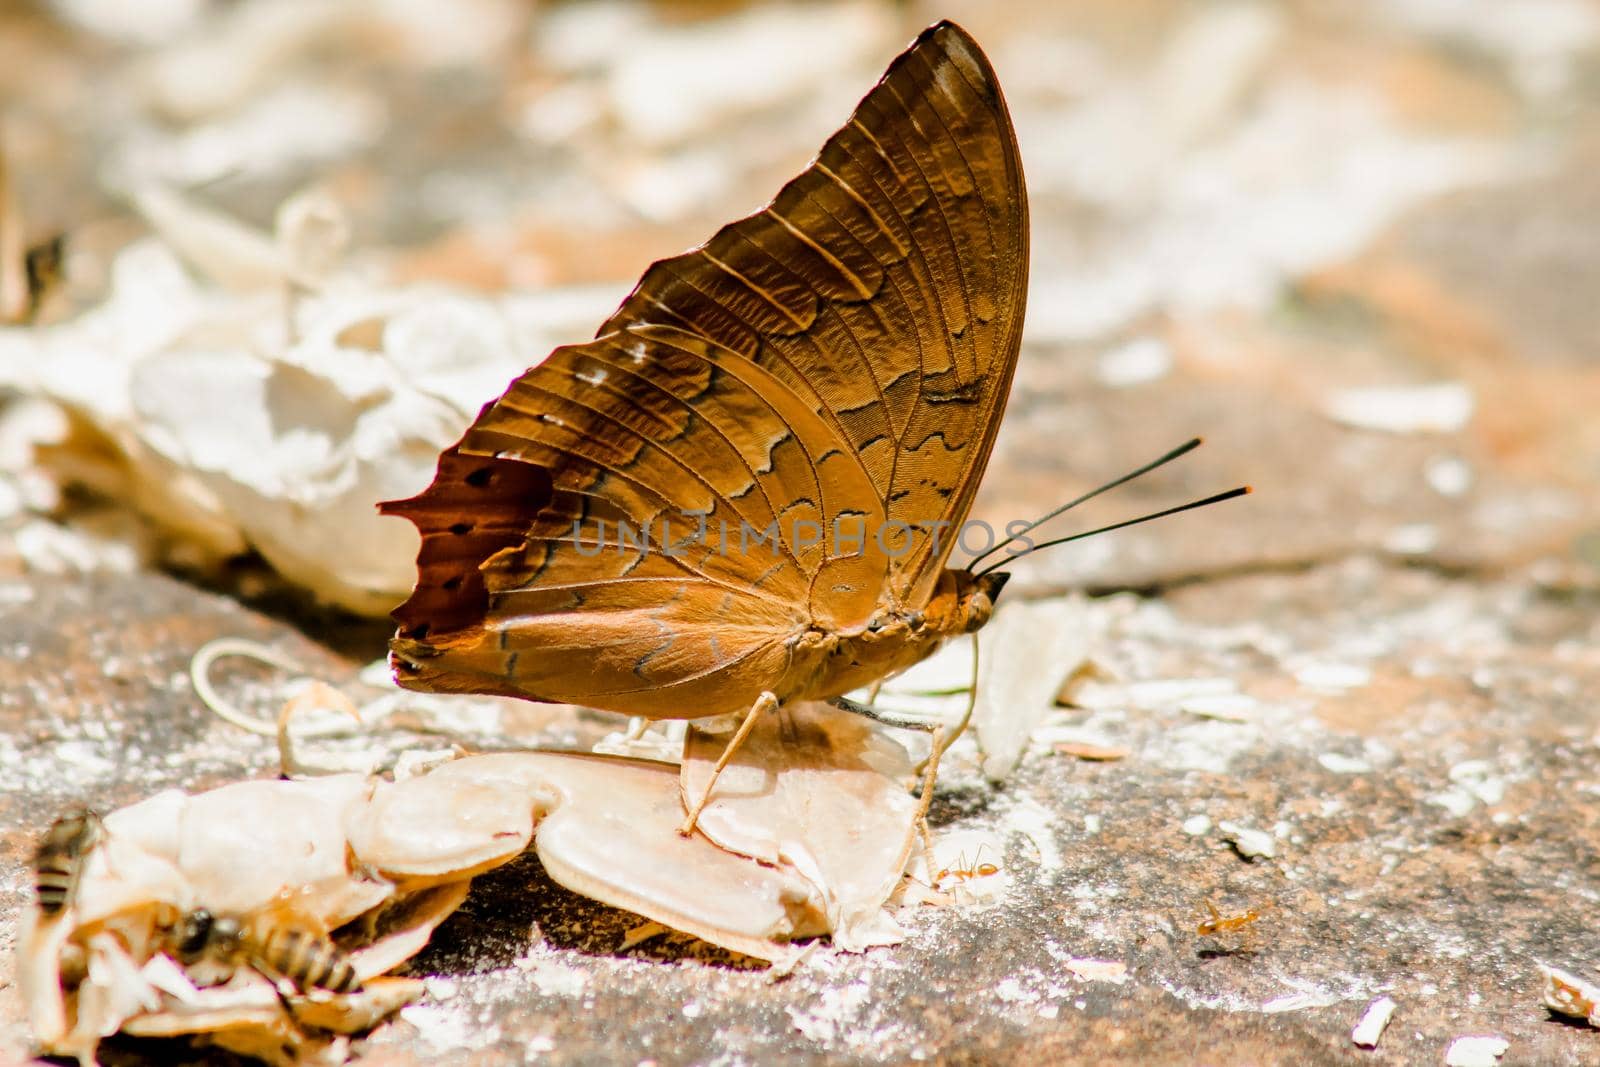 (Common Cruiser) Family name: Family of tassel-leg butterflies (Nymphalidae) on the rocky ground by Puripatt